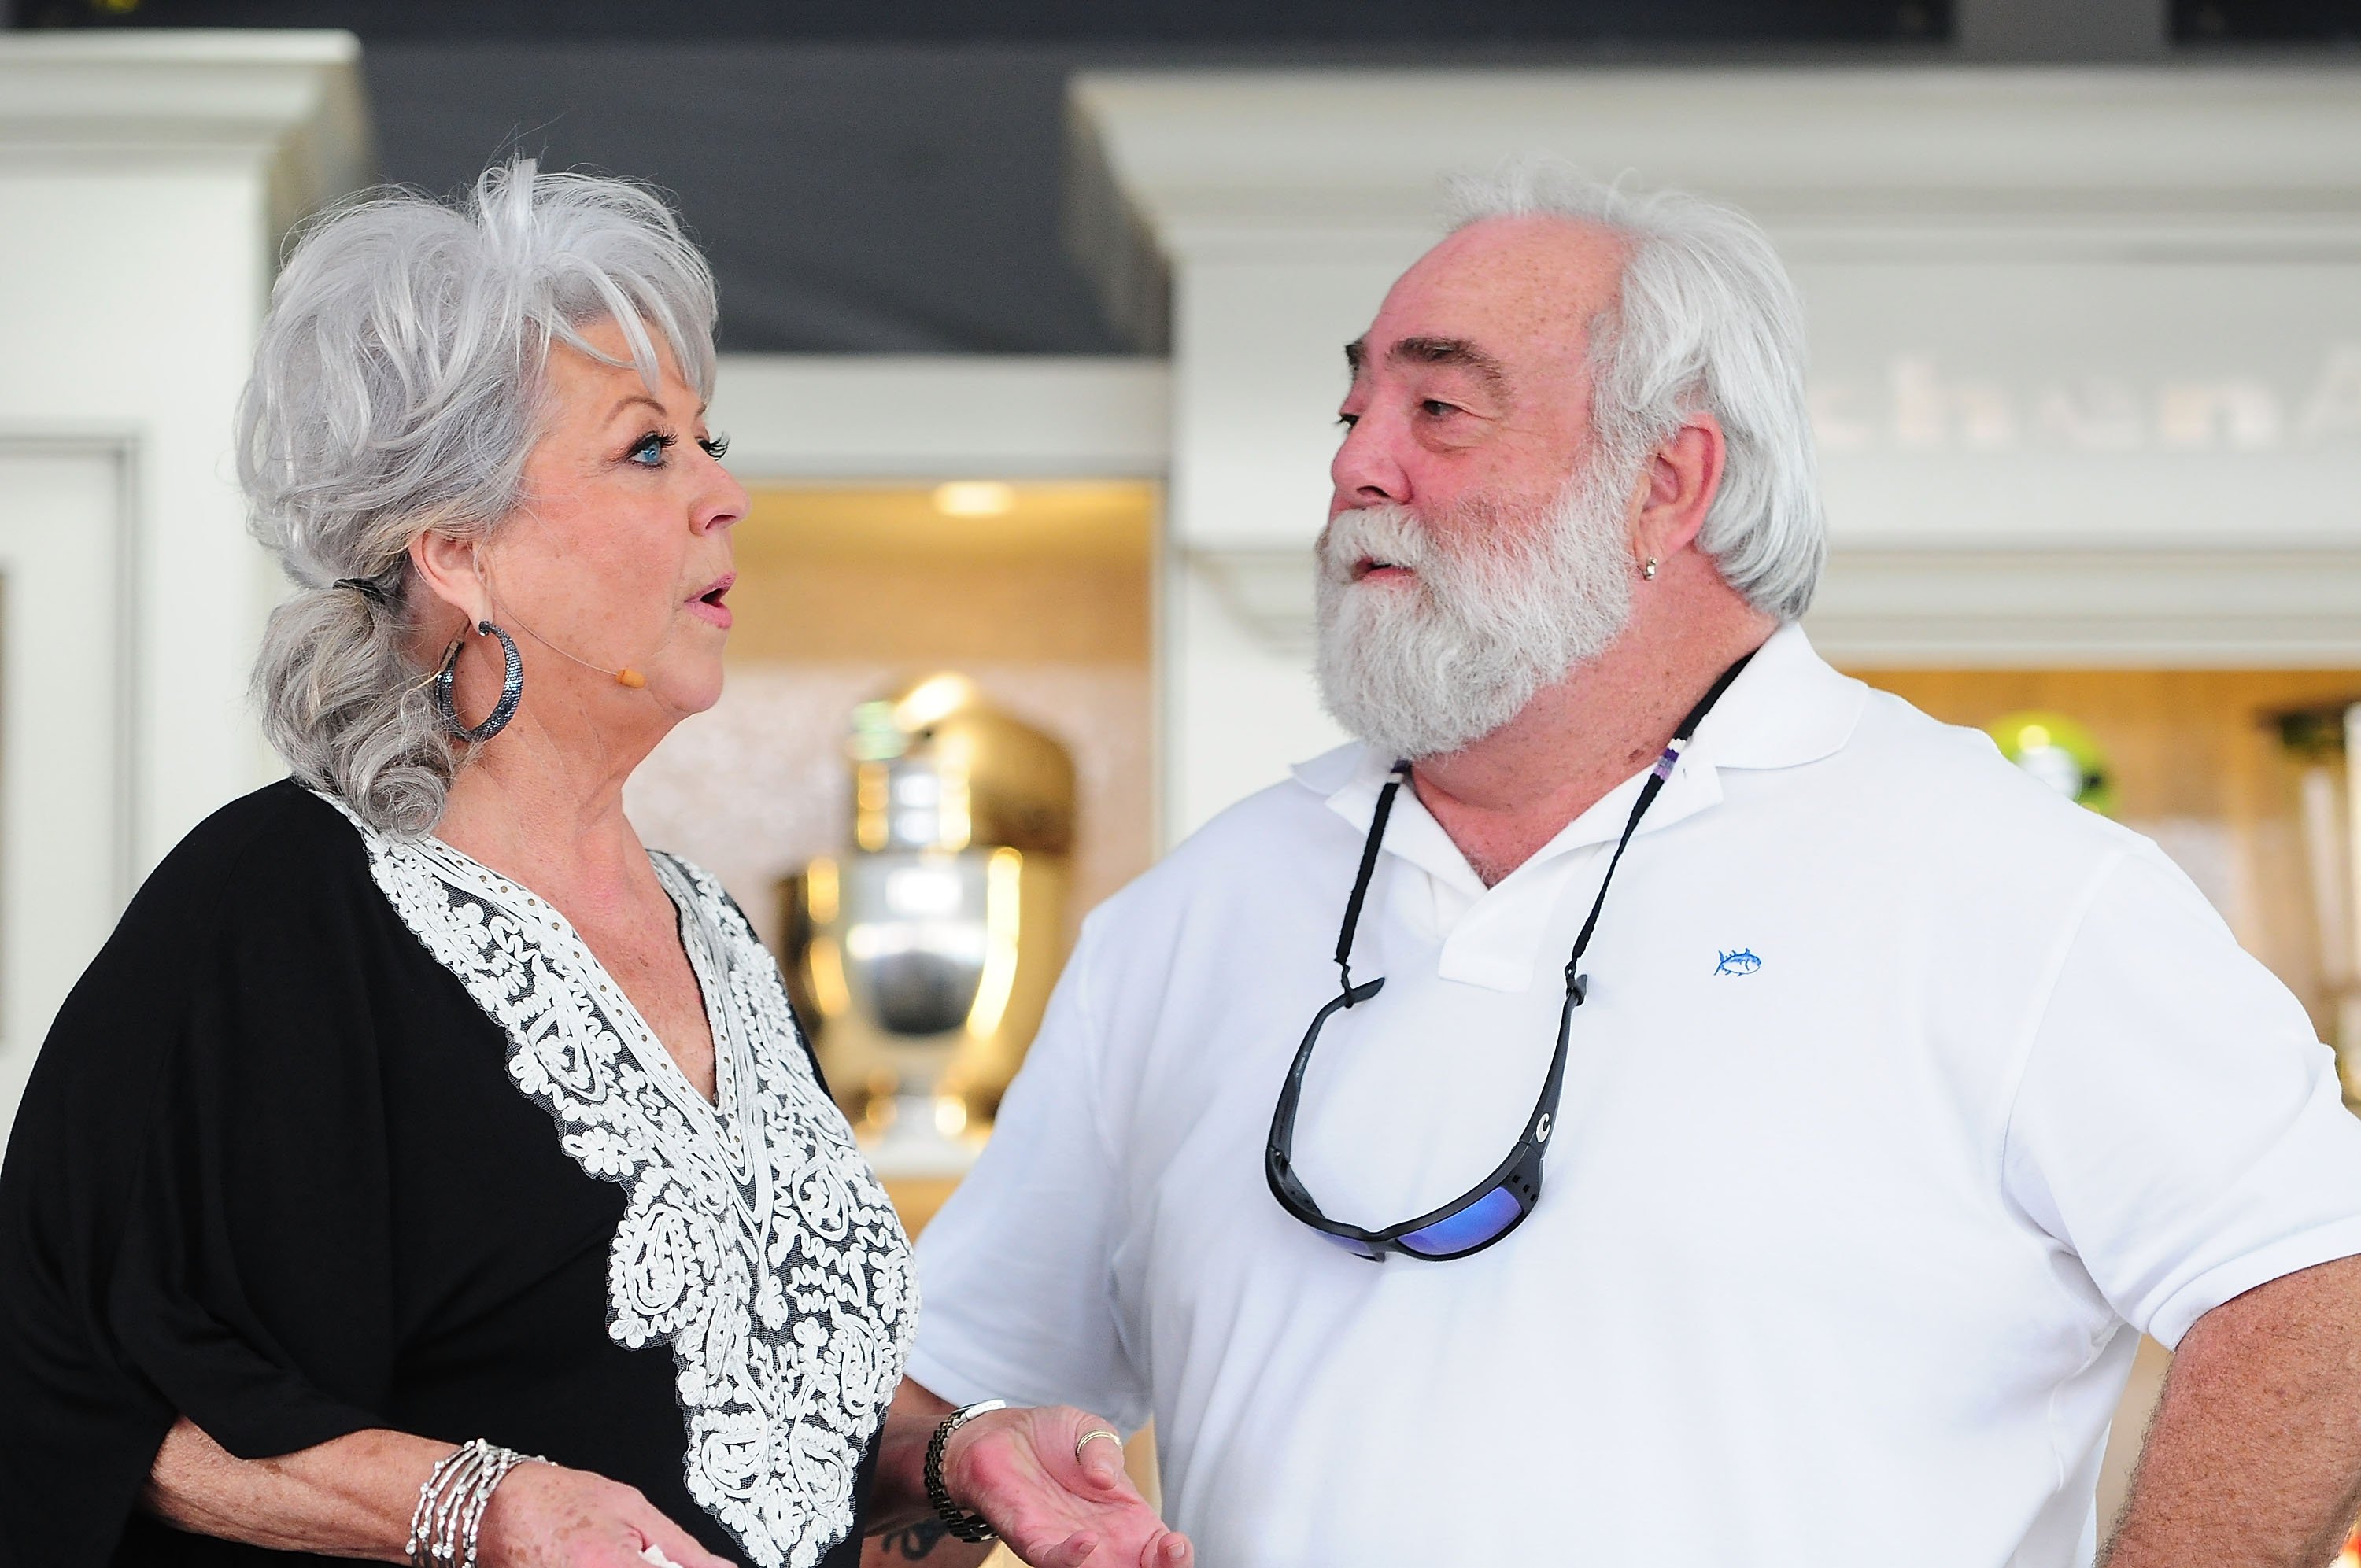 Paula Deen and Michael Groover at the Whole Foods Grand Tasting Village at the 2012 South Beach Wine and Food Festival on February 26, 2012 in Miami Beach, Florida. | Source: Getty Images